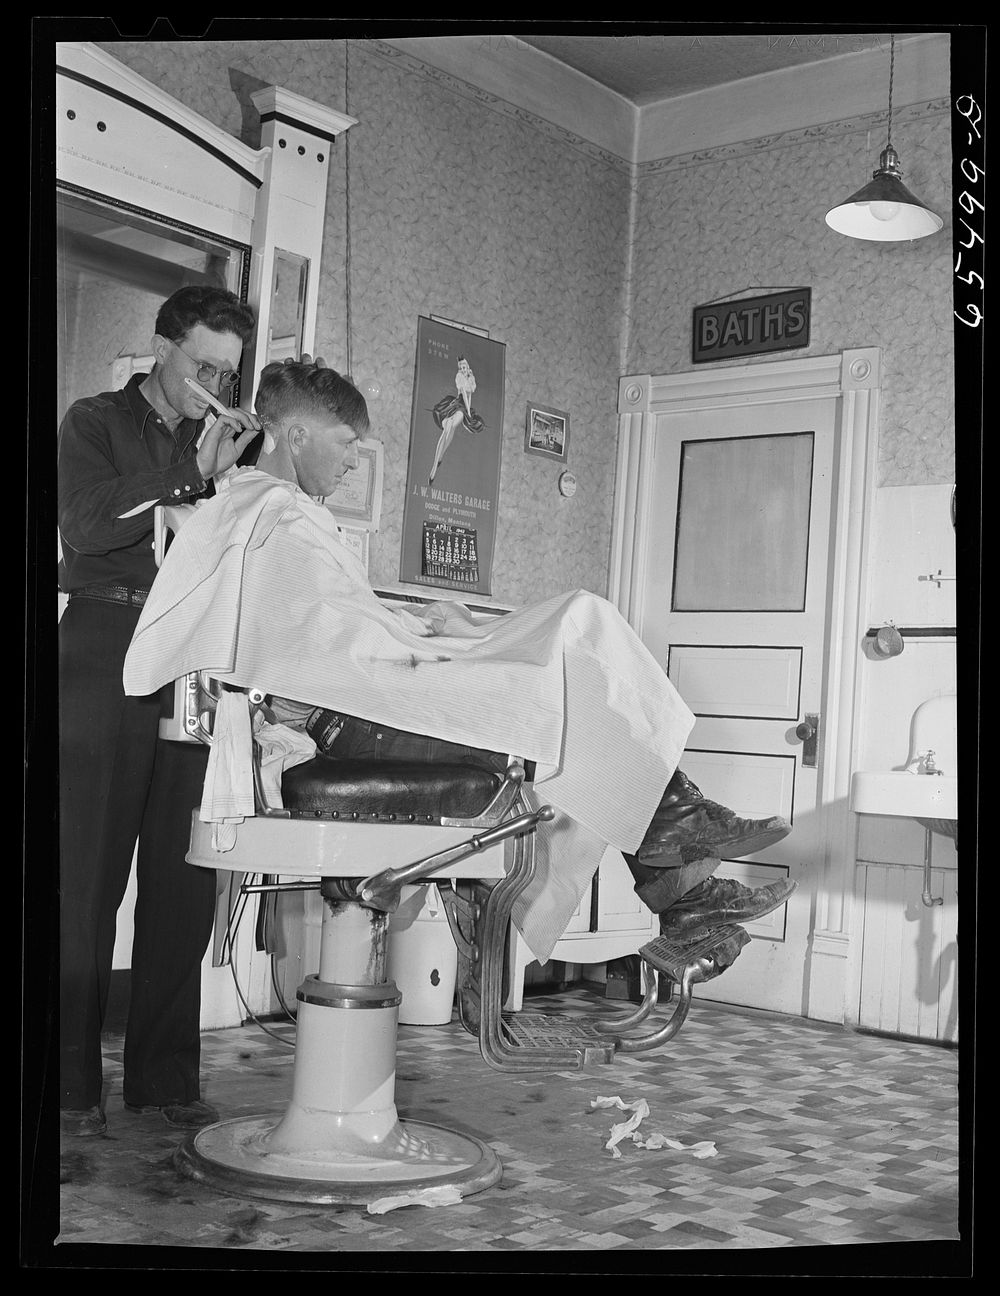 Wisdom, Montana. Barbershop. Sourced from the Library of Congress.